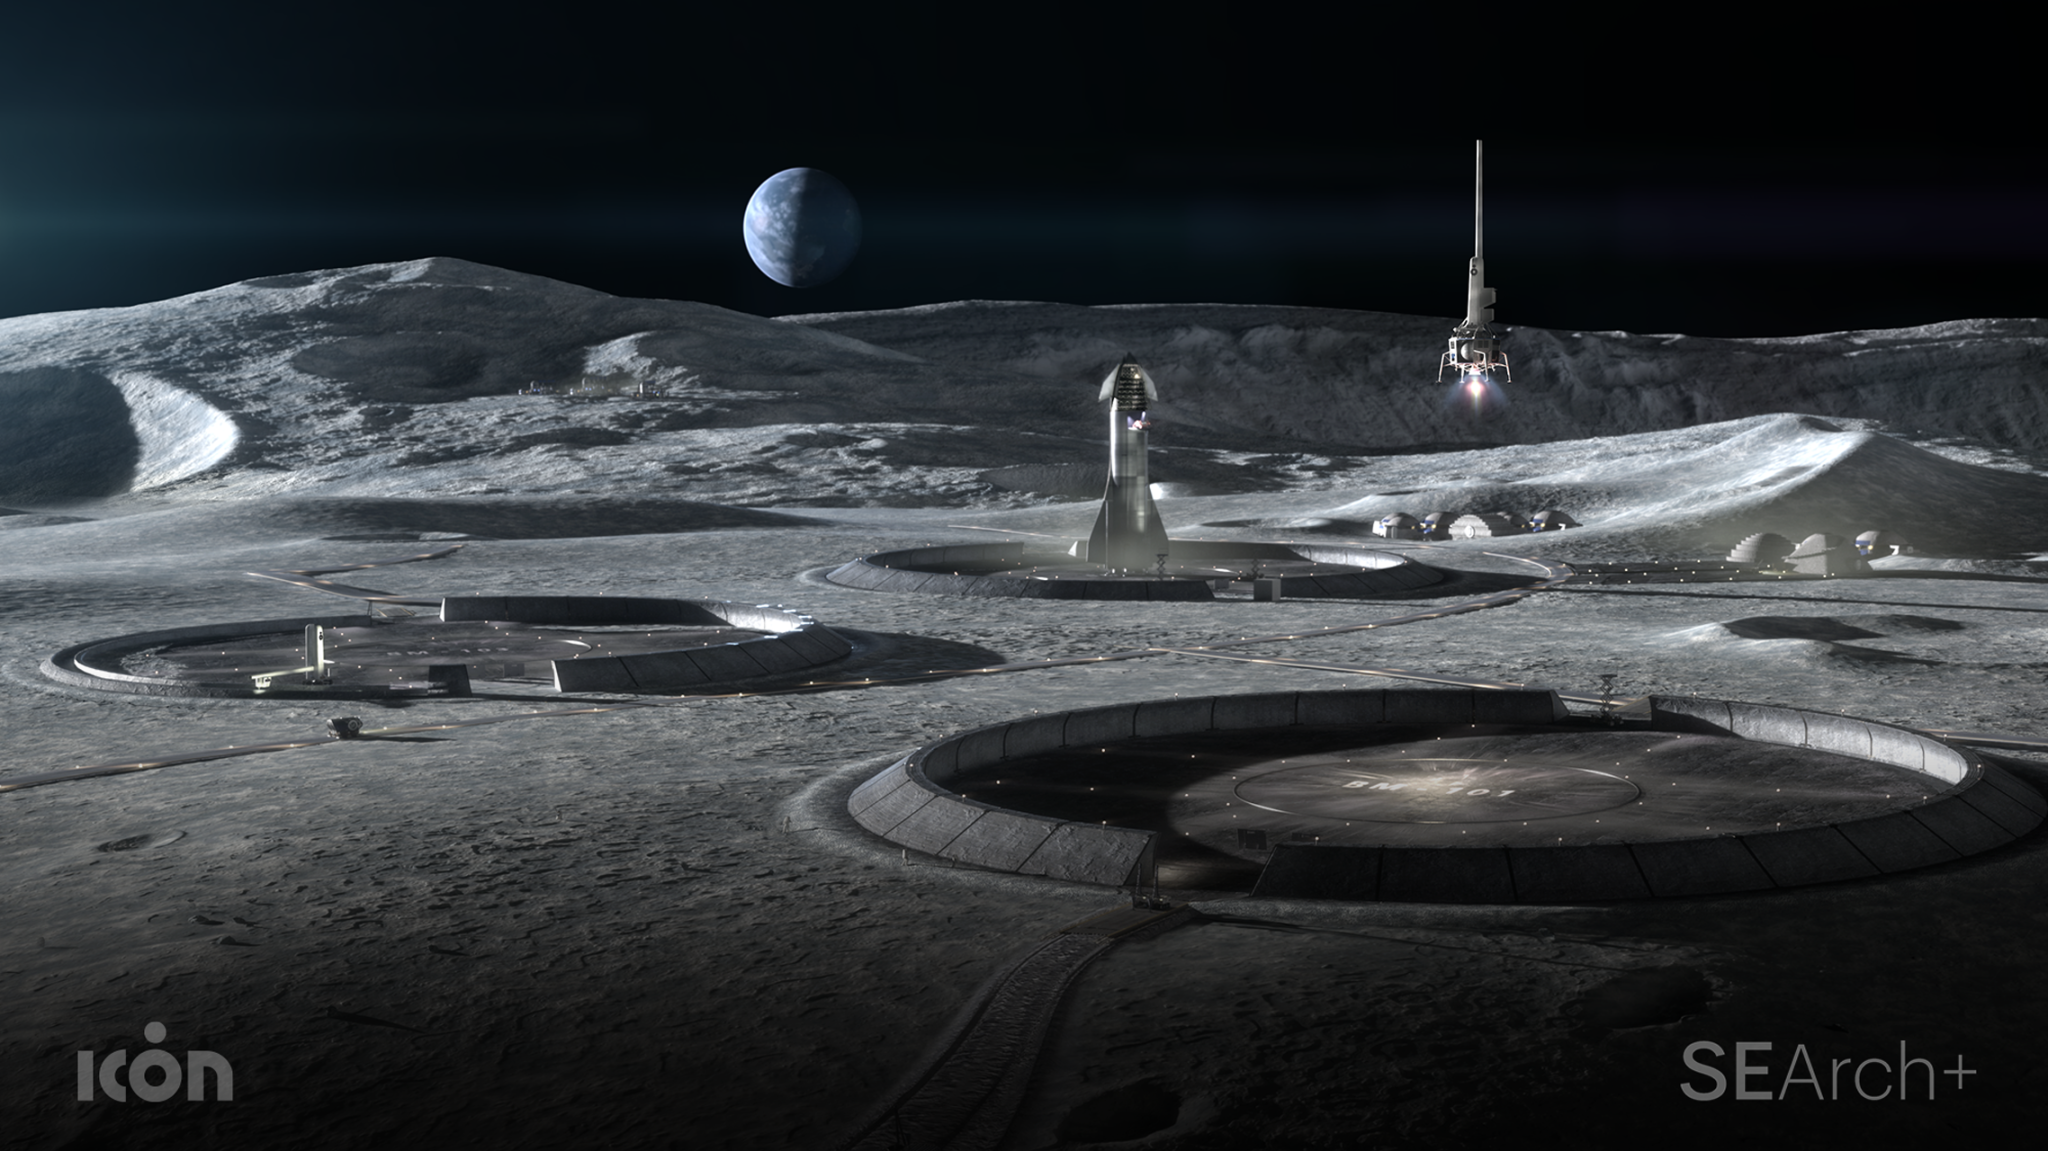 Image provided by ICON, which is working with NASA’s Moon to Mars Autonomous Construction Technologies project.